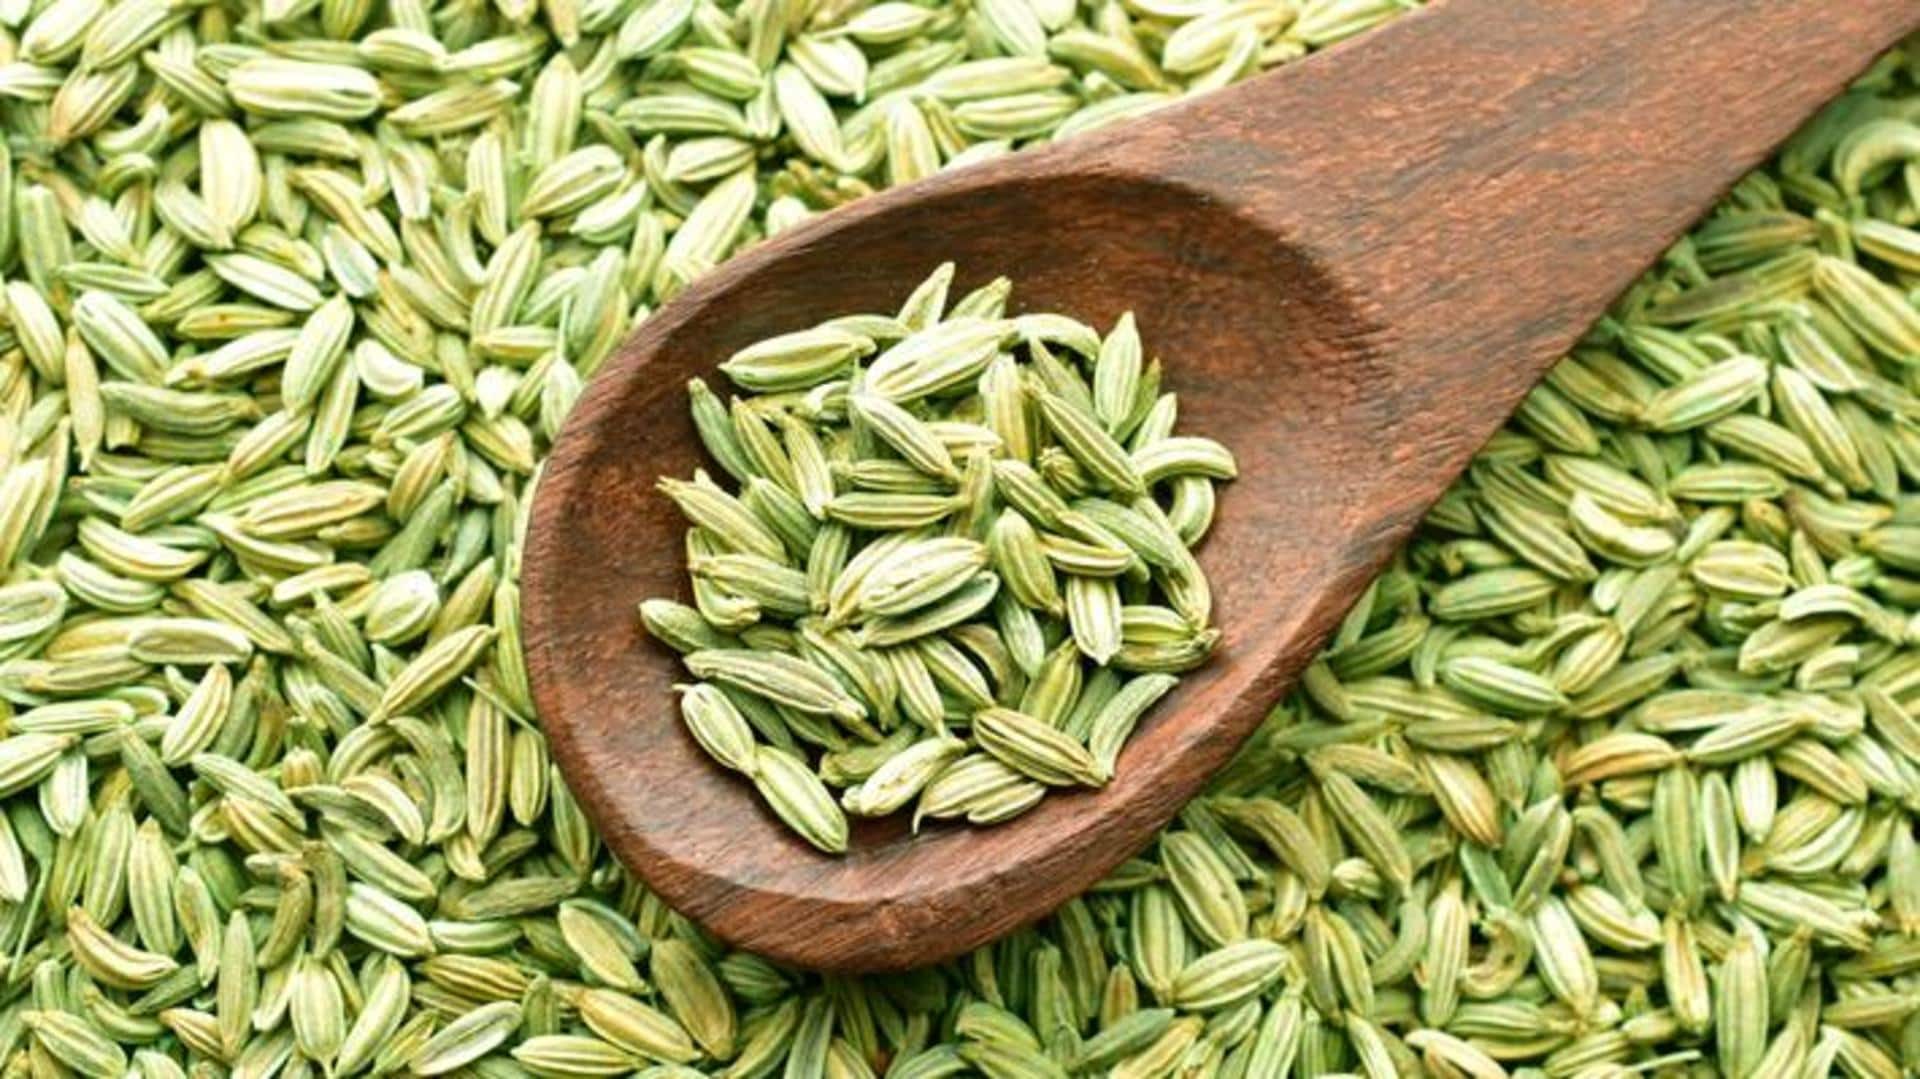 Here are five delectable recipes using fennel seeds